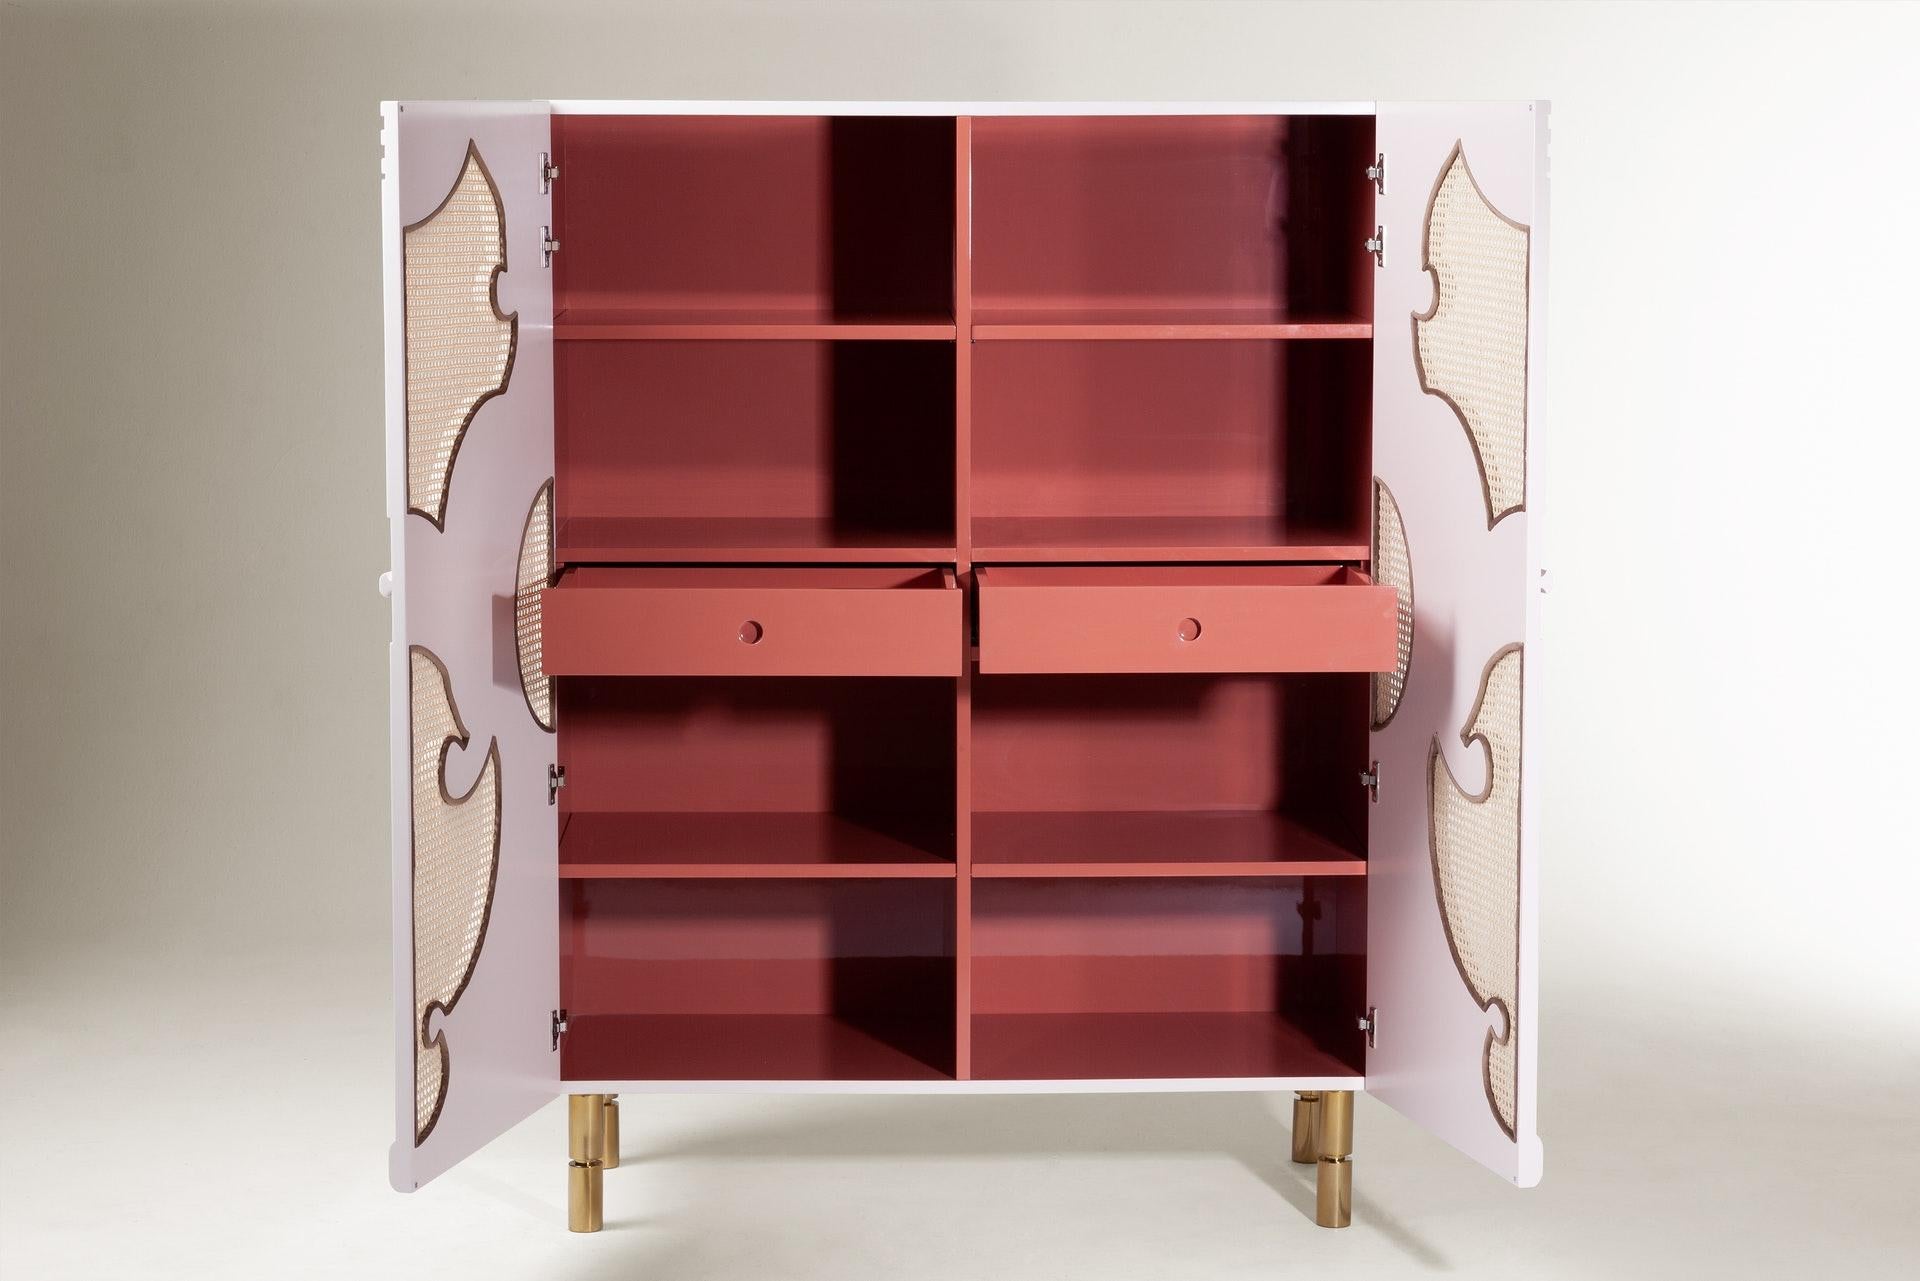 Traje de Luces Bar Cabinet encompasses an exploration of delicate forms and a richness in details found while travelling through the south of Spain. Elegance, tradition and superior craftsmanship combined into a perfect fusion of materials to entice